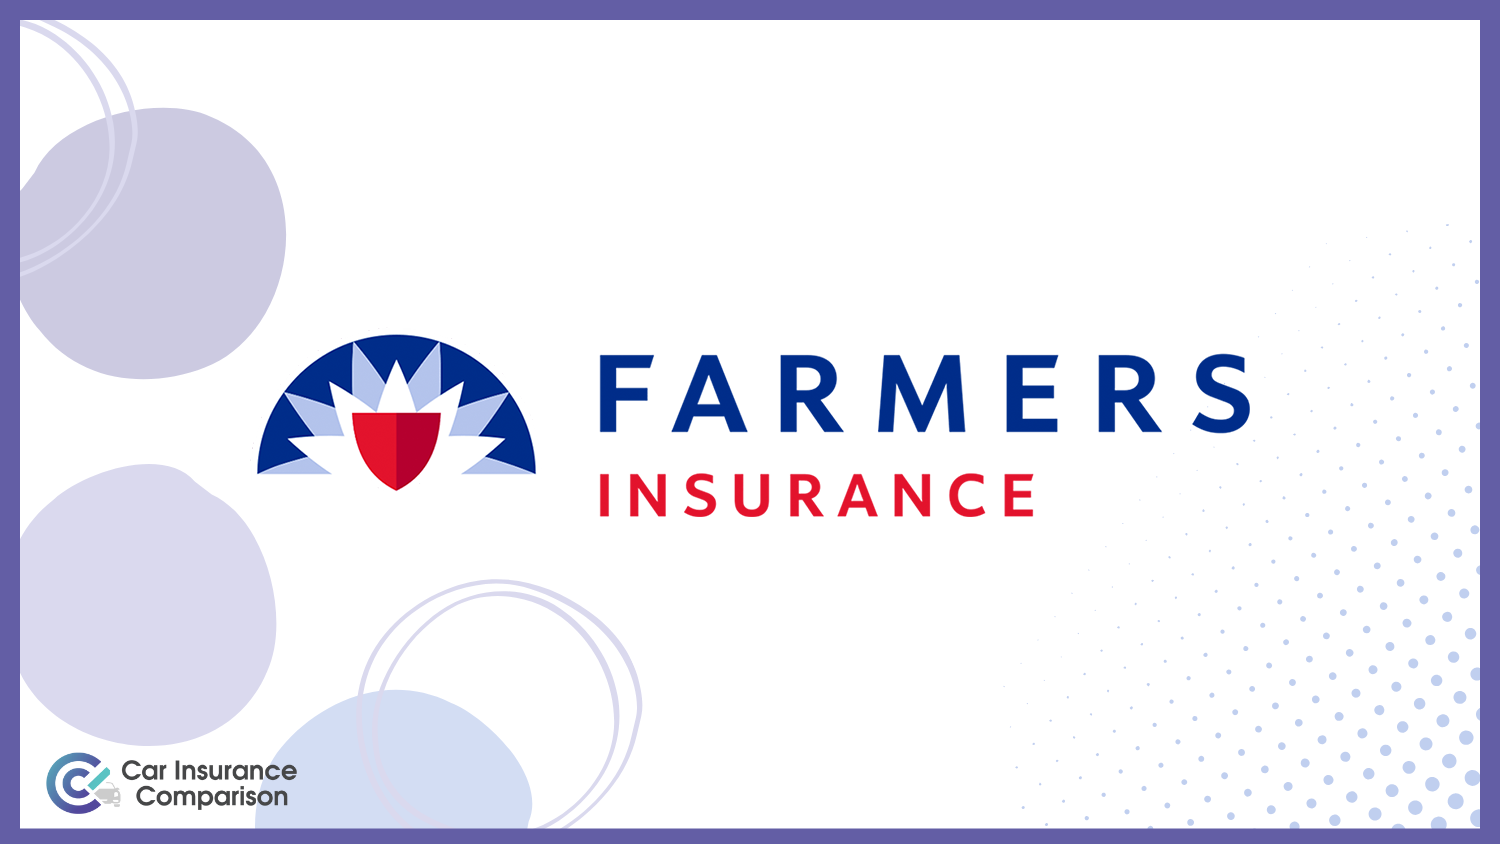 Farmers: Compare Best Car Insurance Companies That Accept a Suspended License